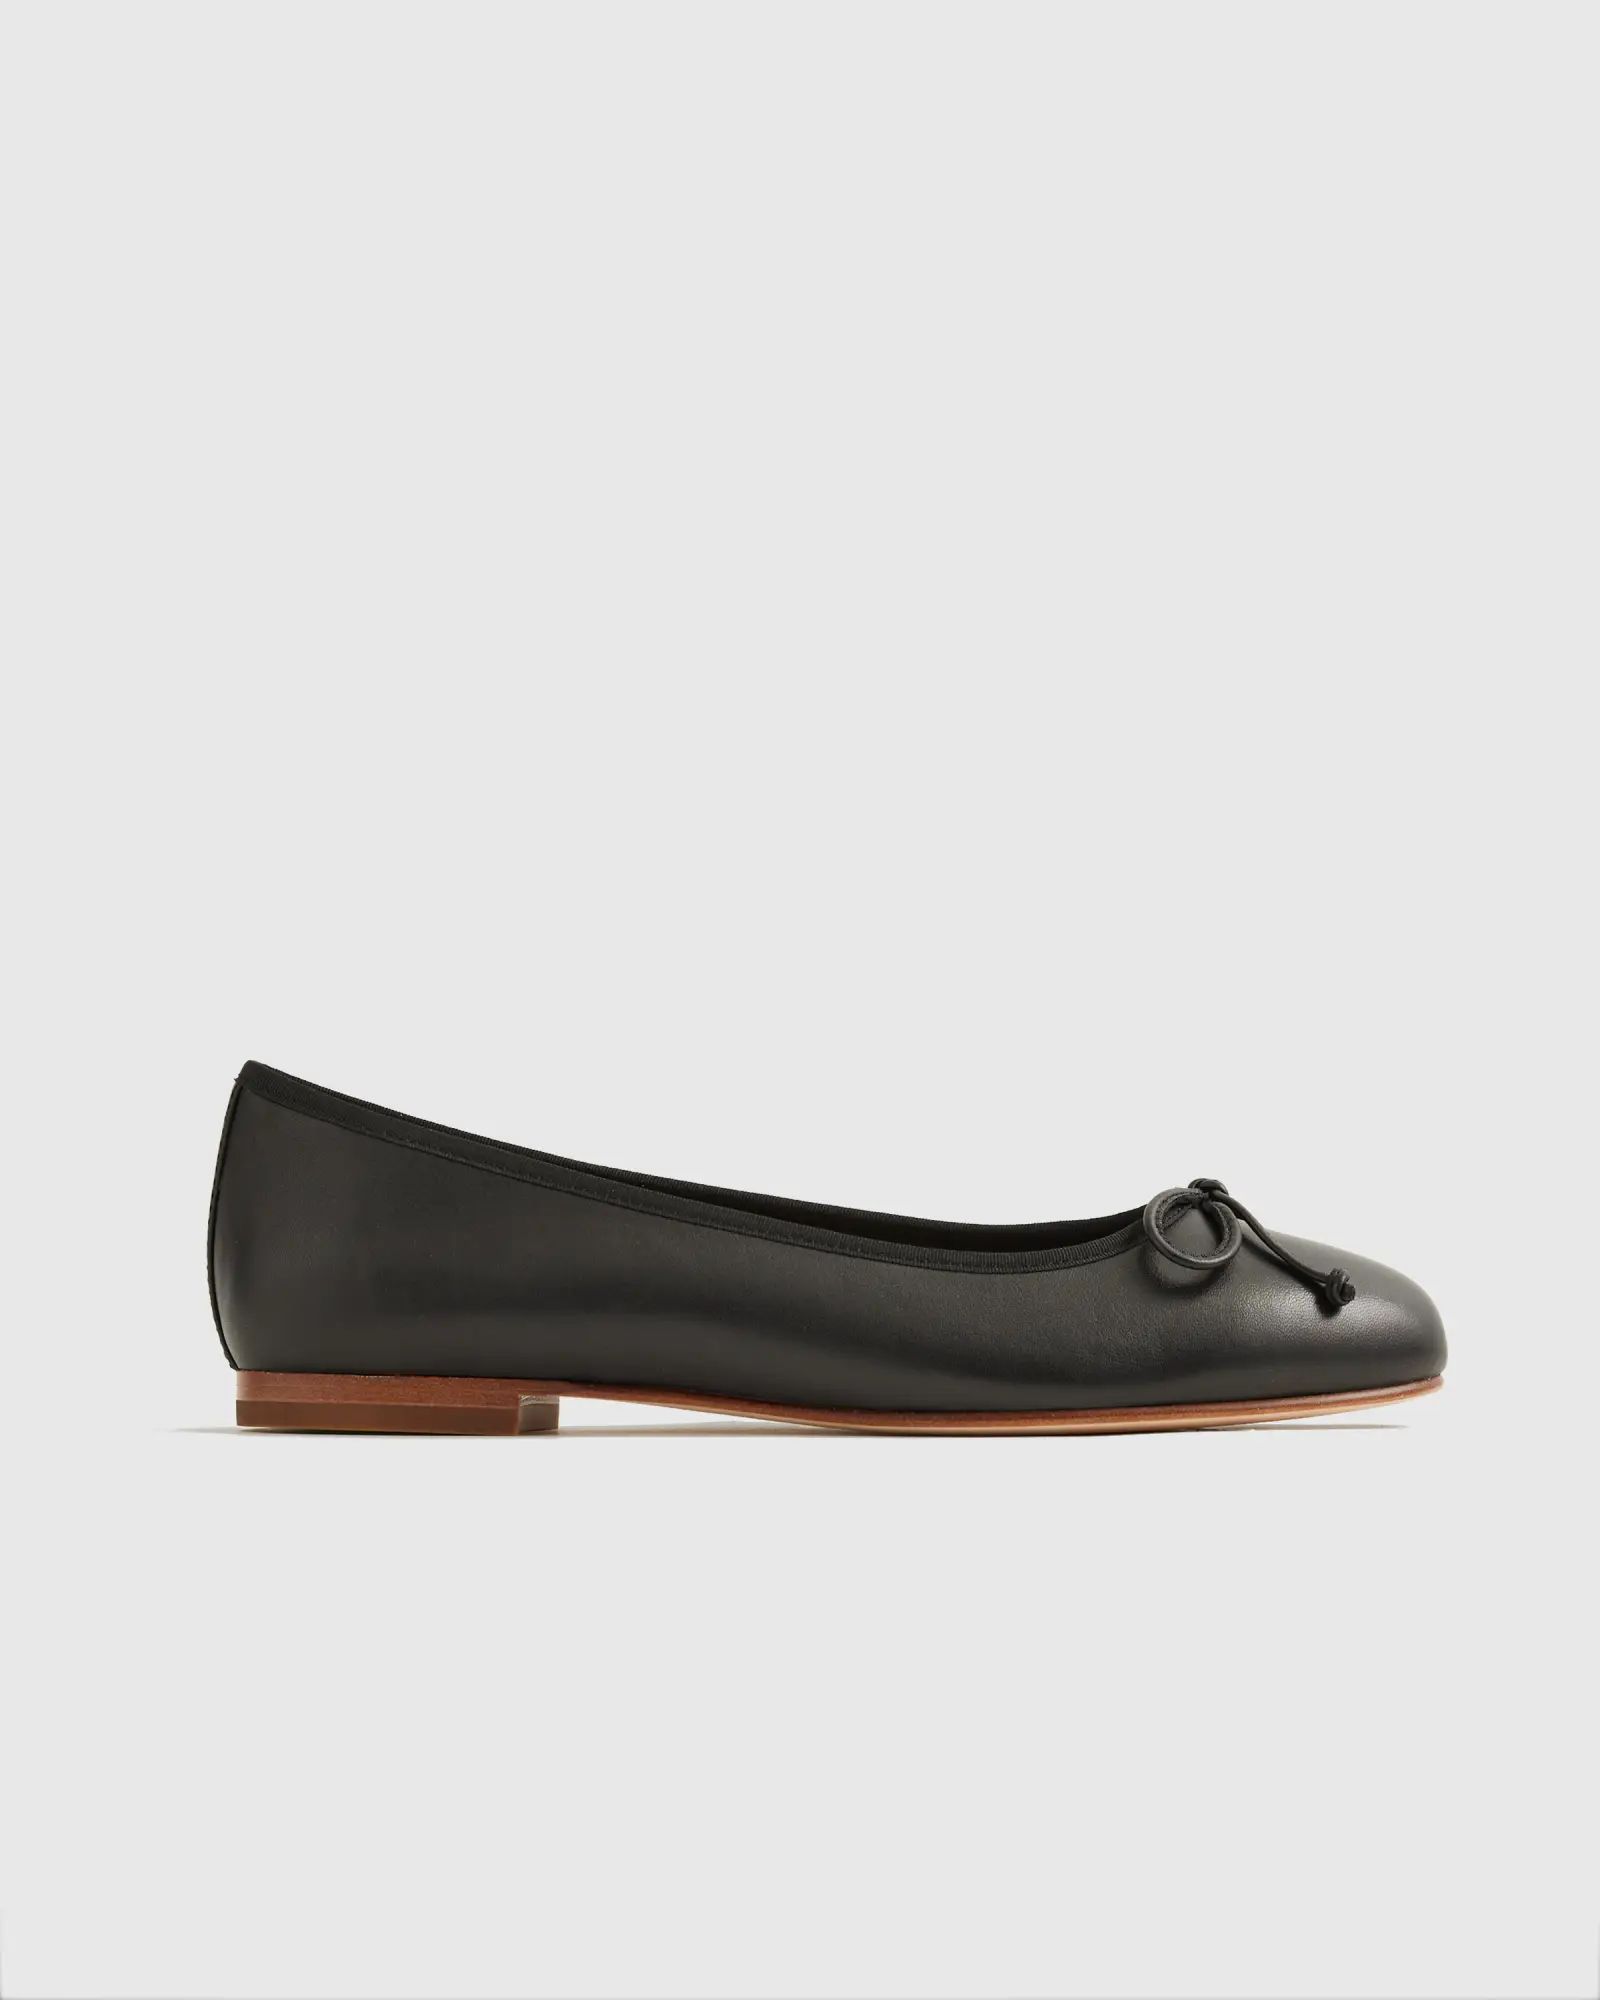 Women's Italian Leather Bow Ballet Flat | Quince